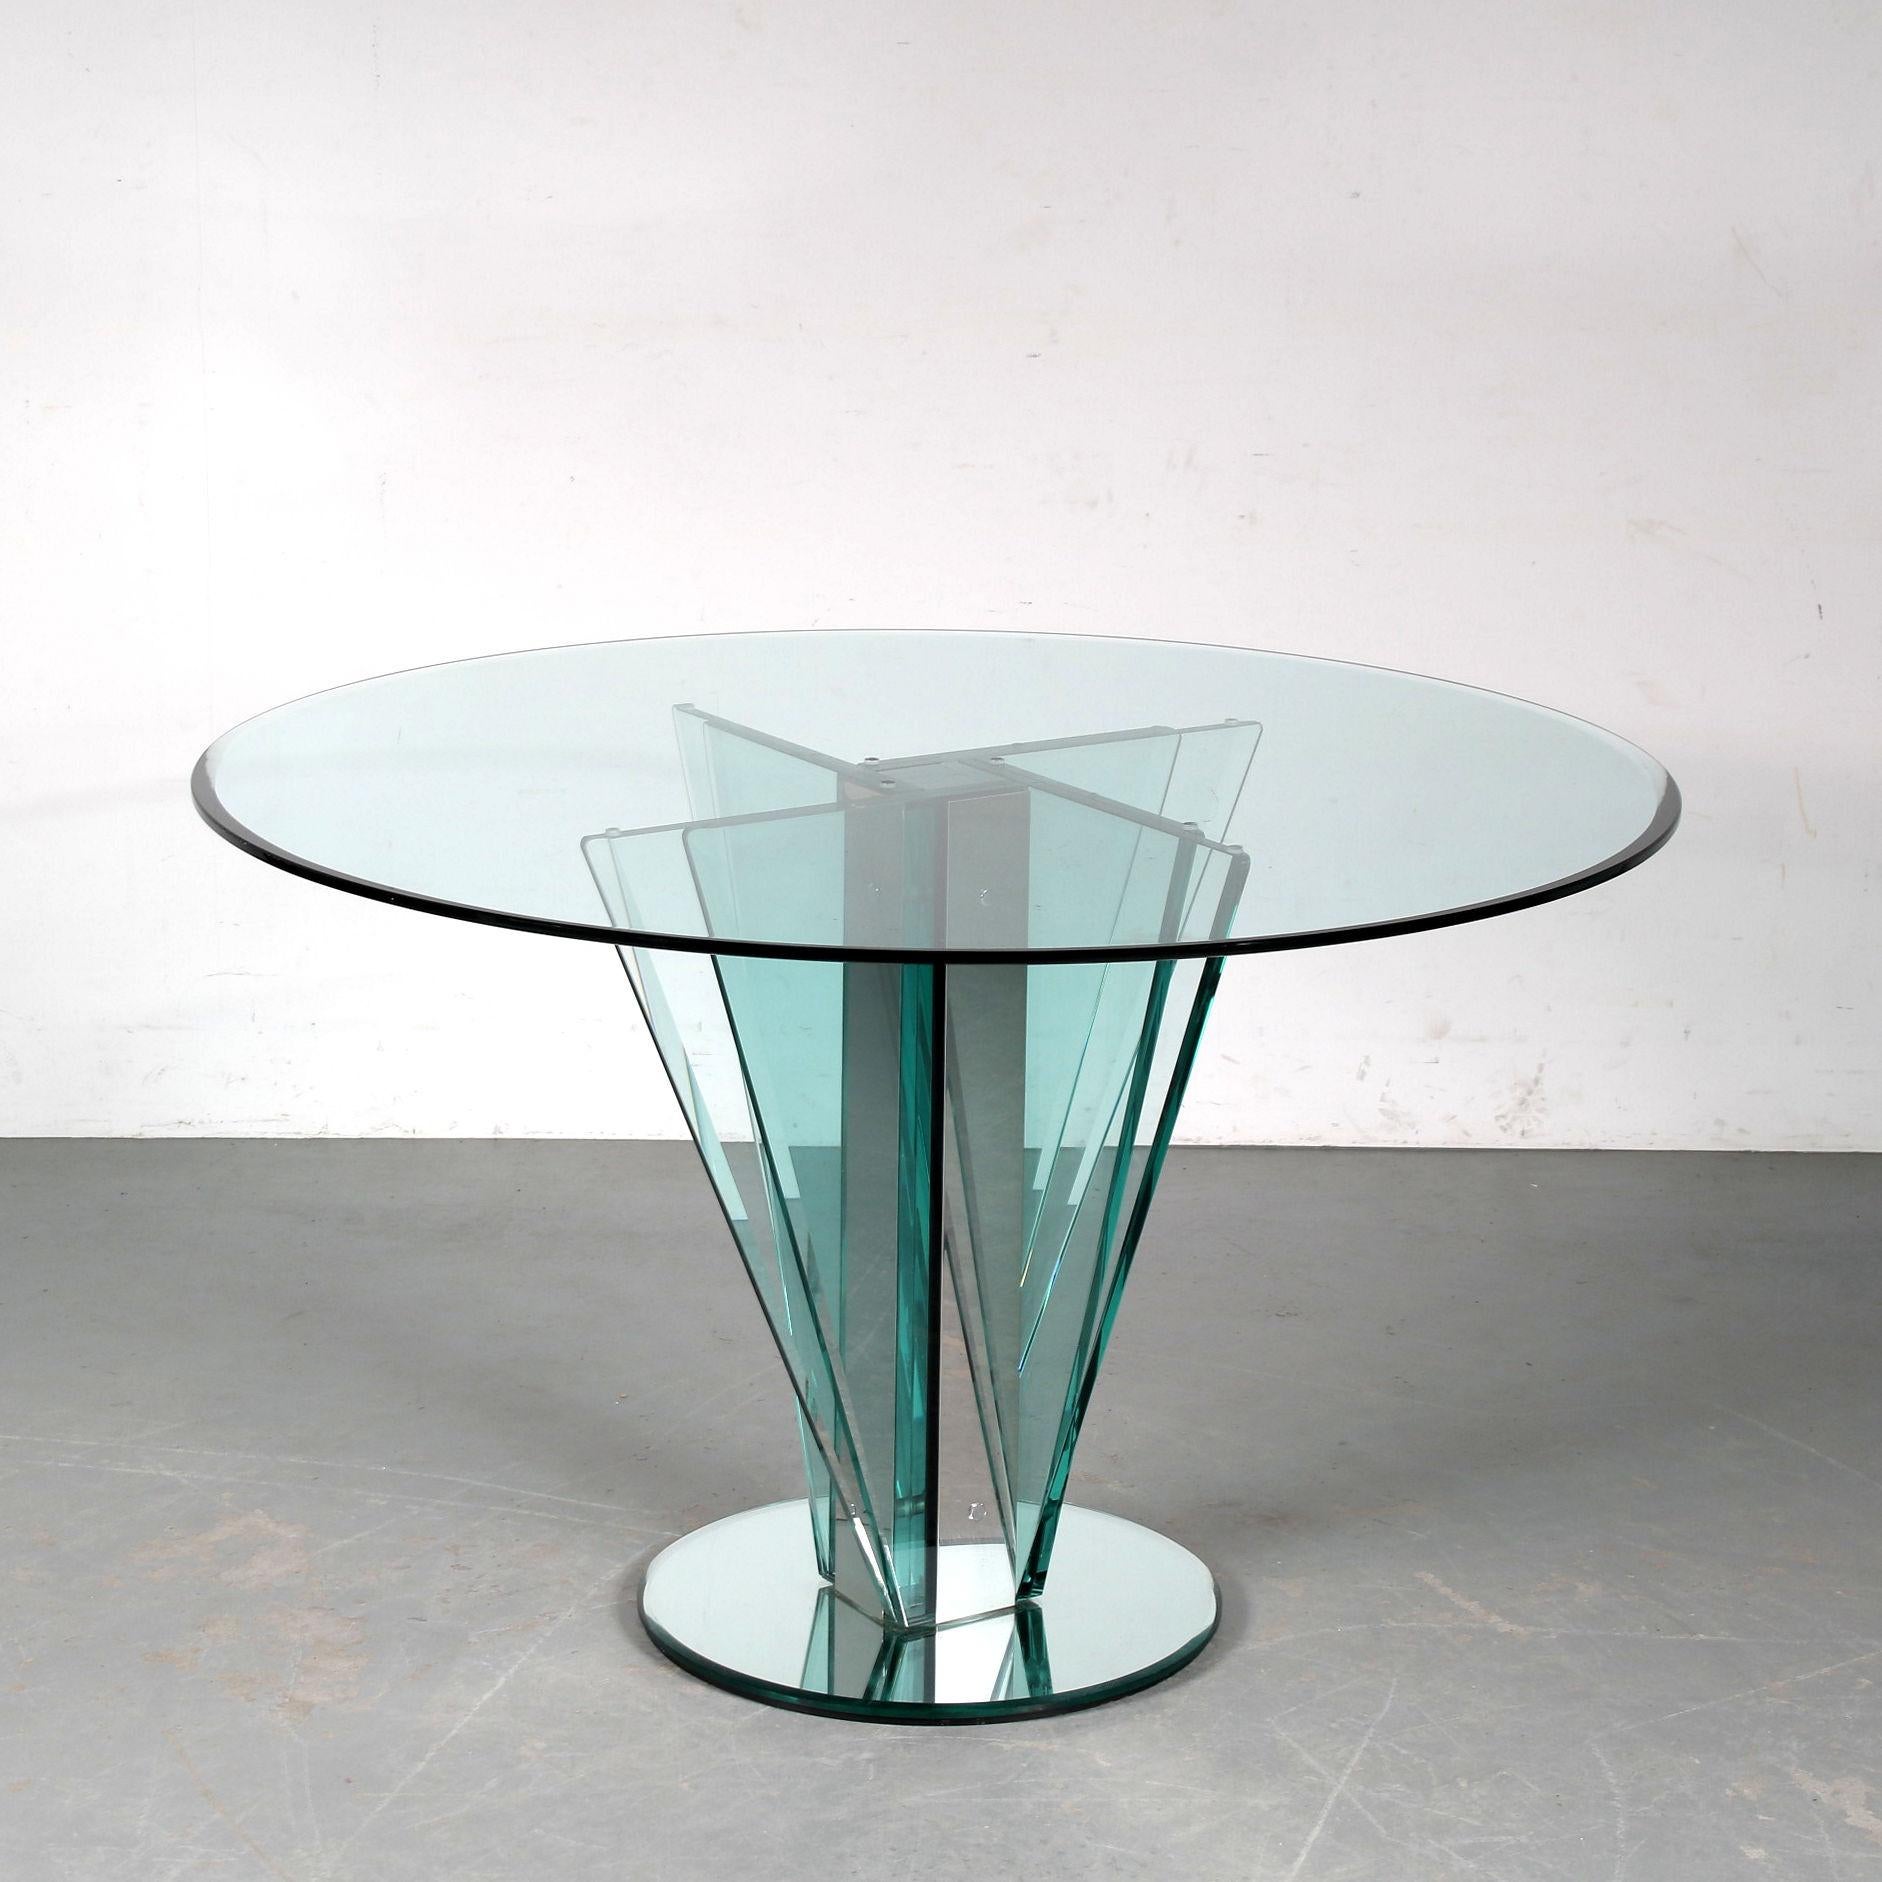 Italian Nile Glass Table attributed to Pietro Chiesa for Fontana Arte, Italy 1970 For Sale